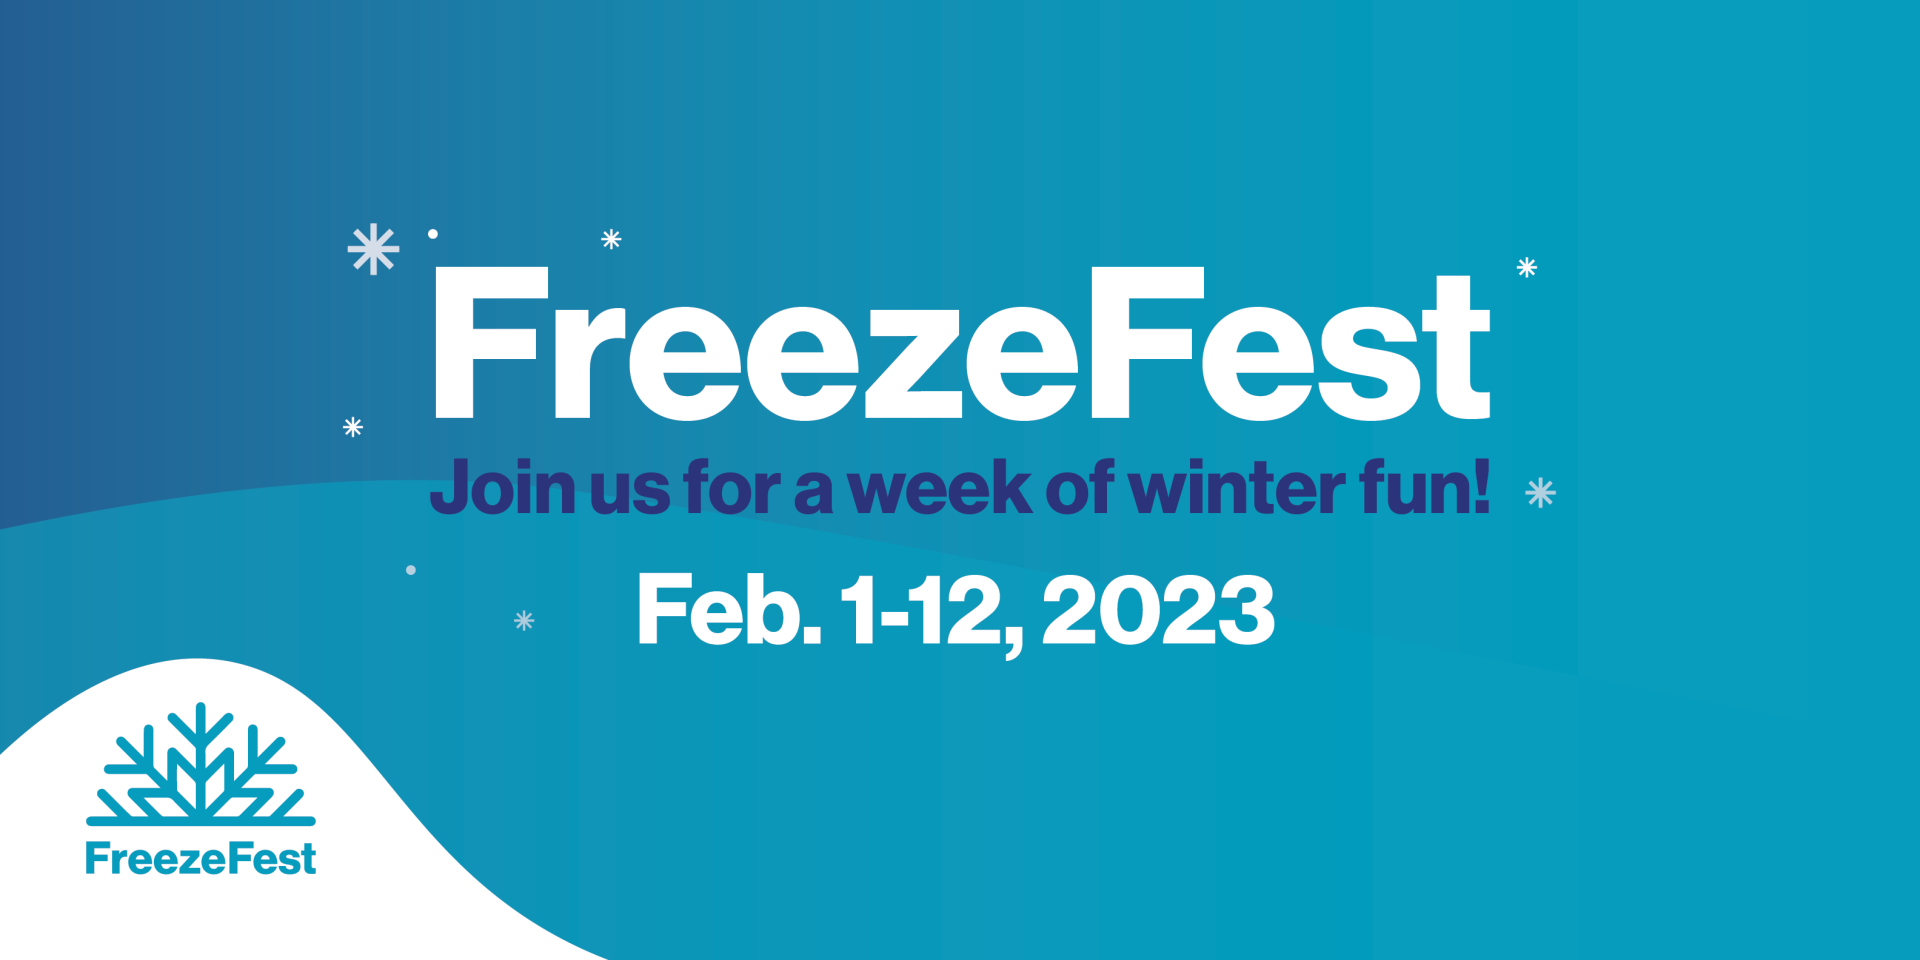 FreezeFest Join us for a week of winter fun! Feb. 1-12, 2023